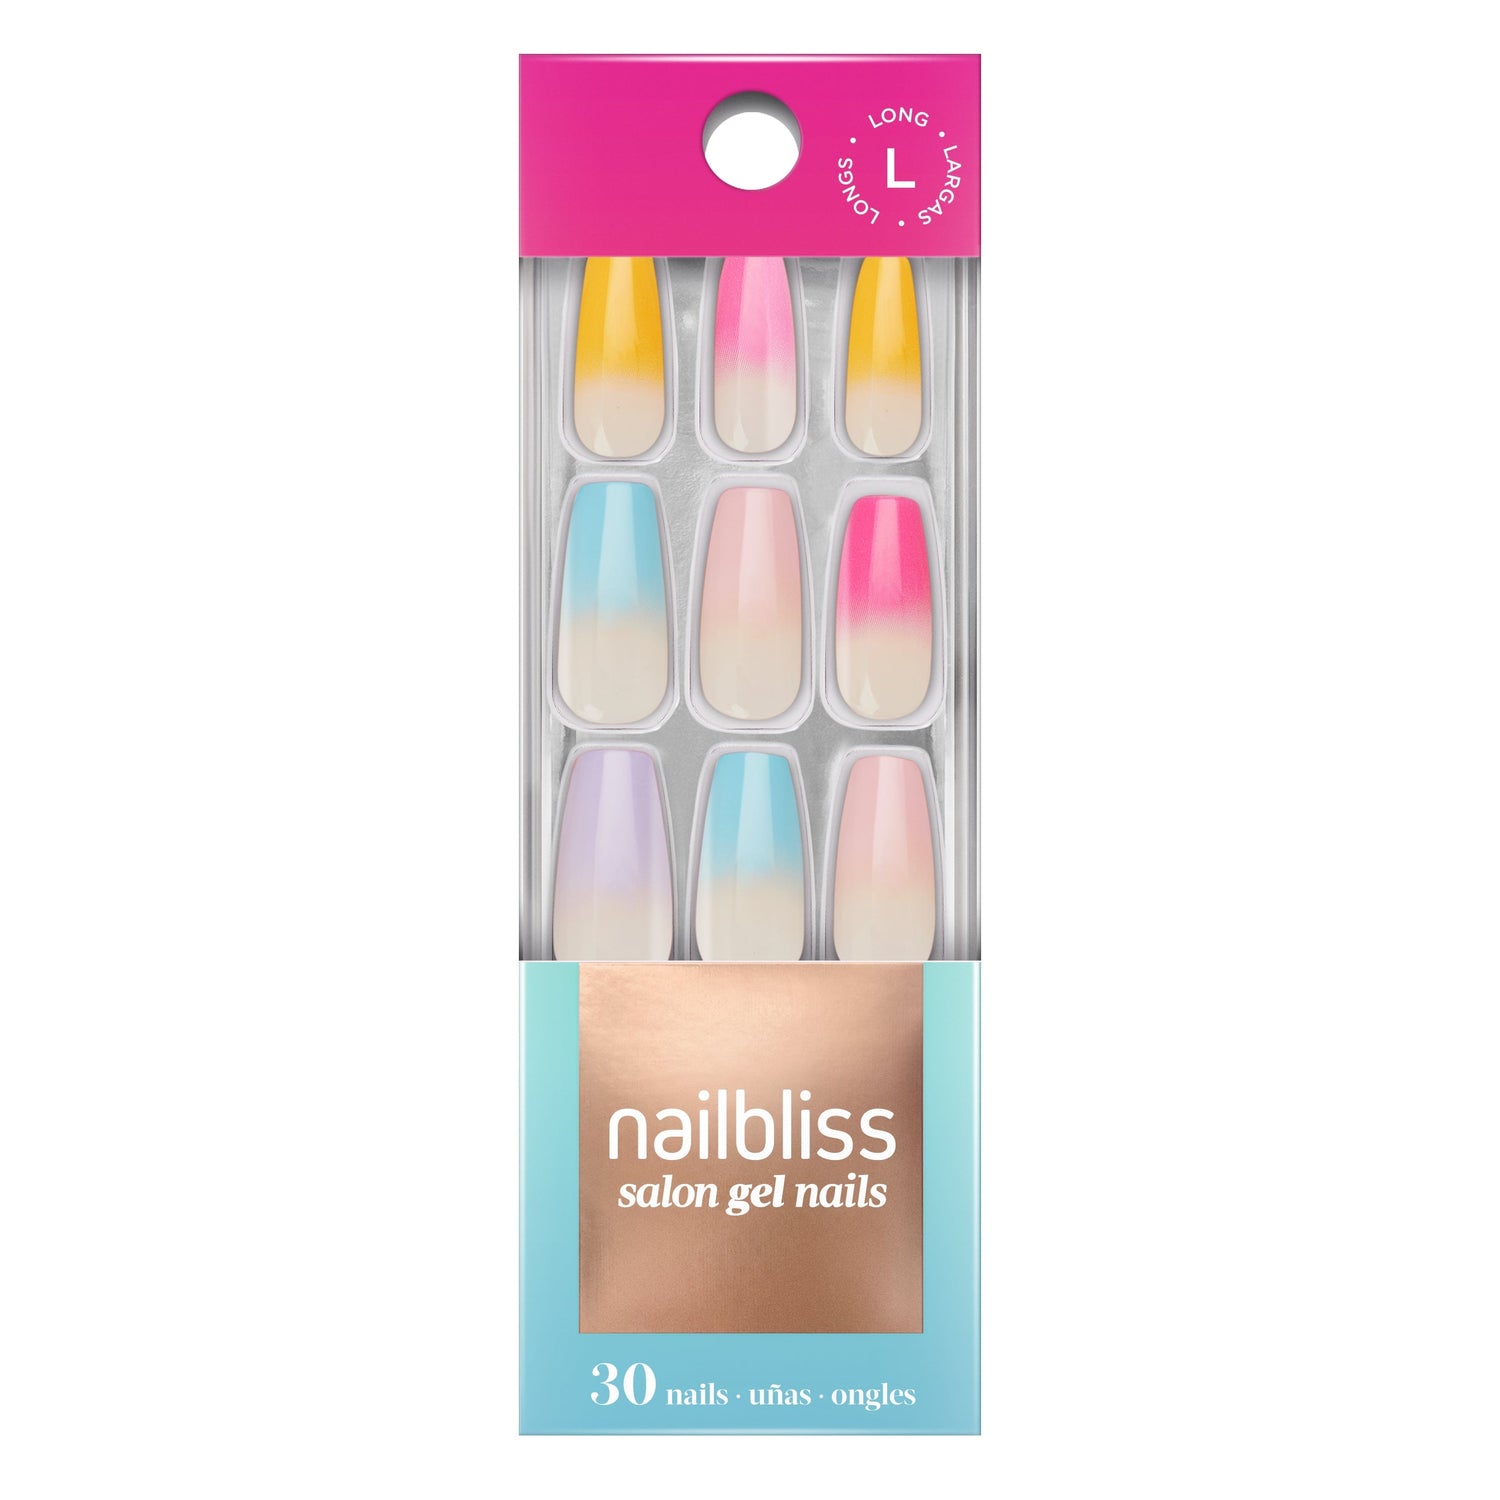 Dashing Diva nailbliss long, coffin, neutral to multicolor ombre glue-on gel nails.